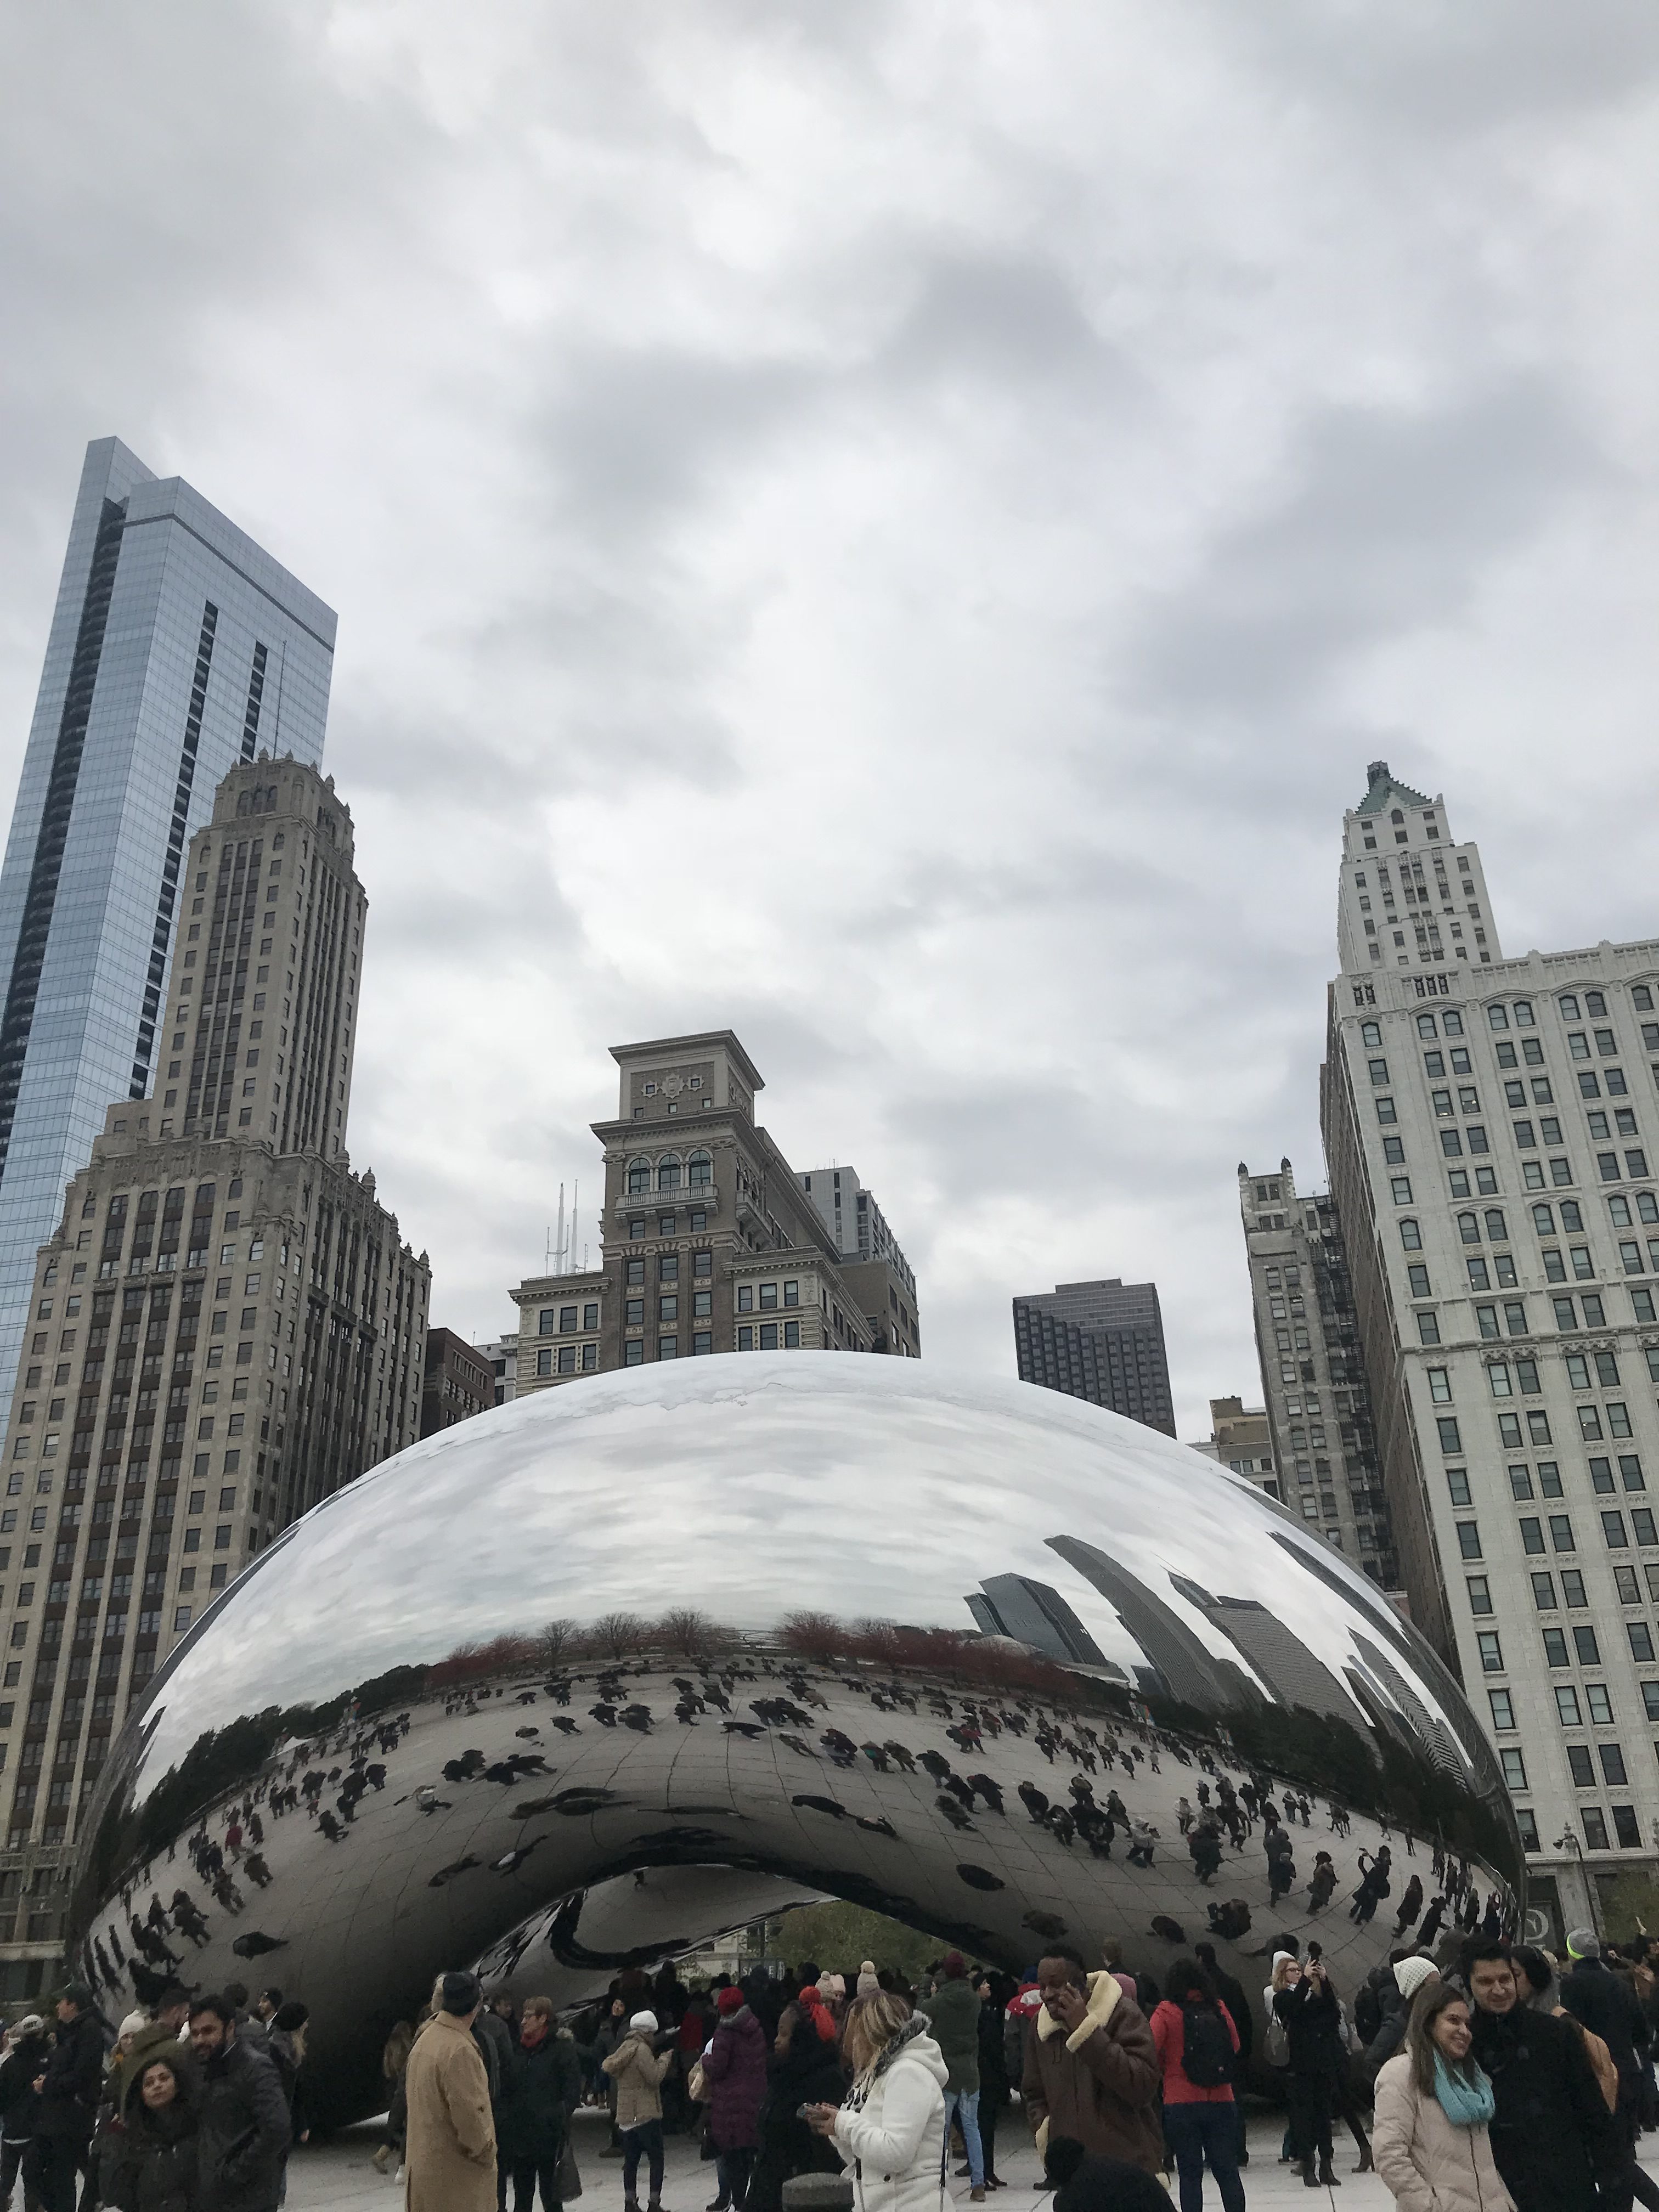 Cloud Gate sculpture in Chicago. Often addressed as "The Bean."